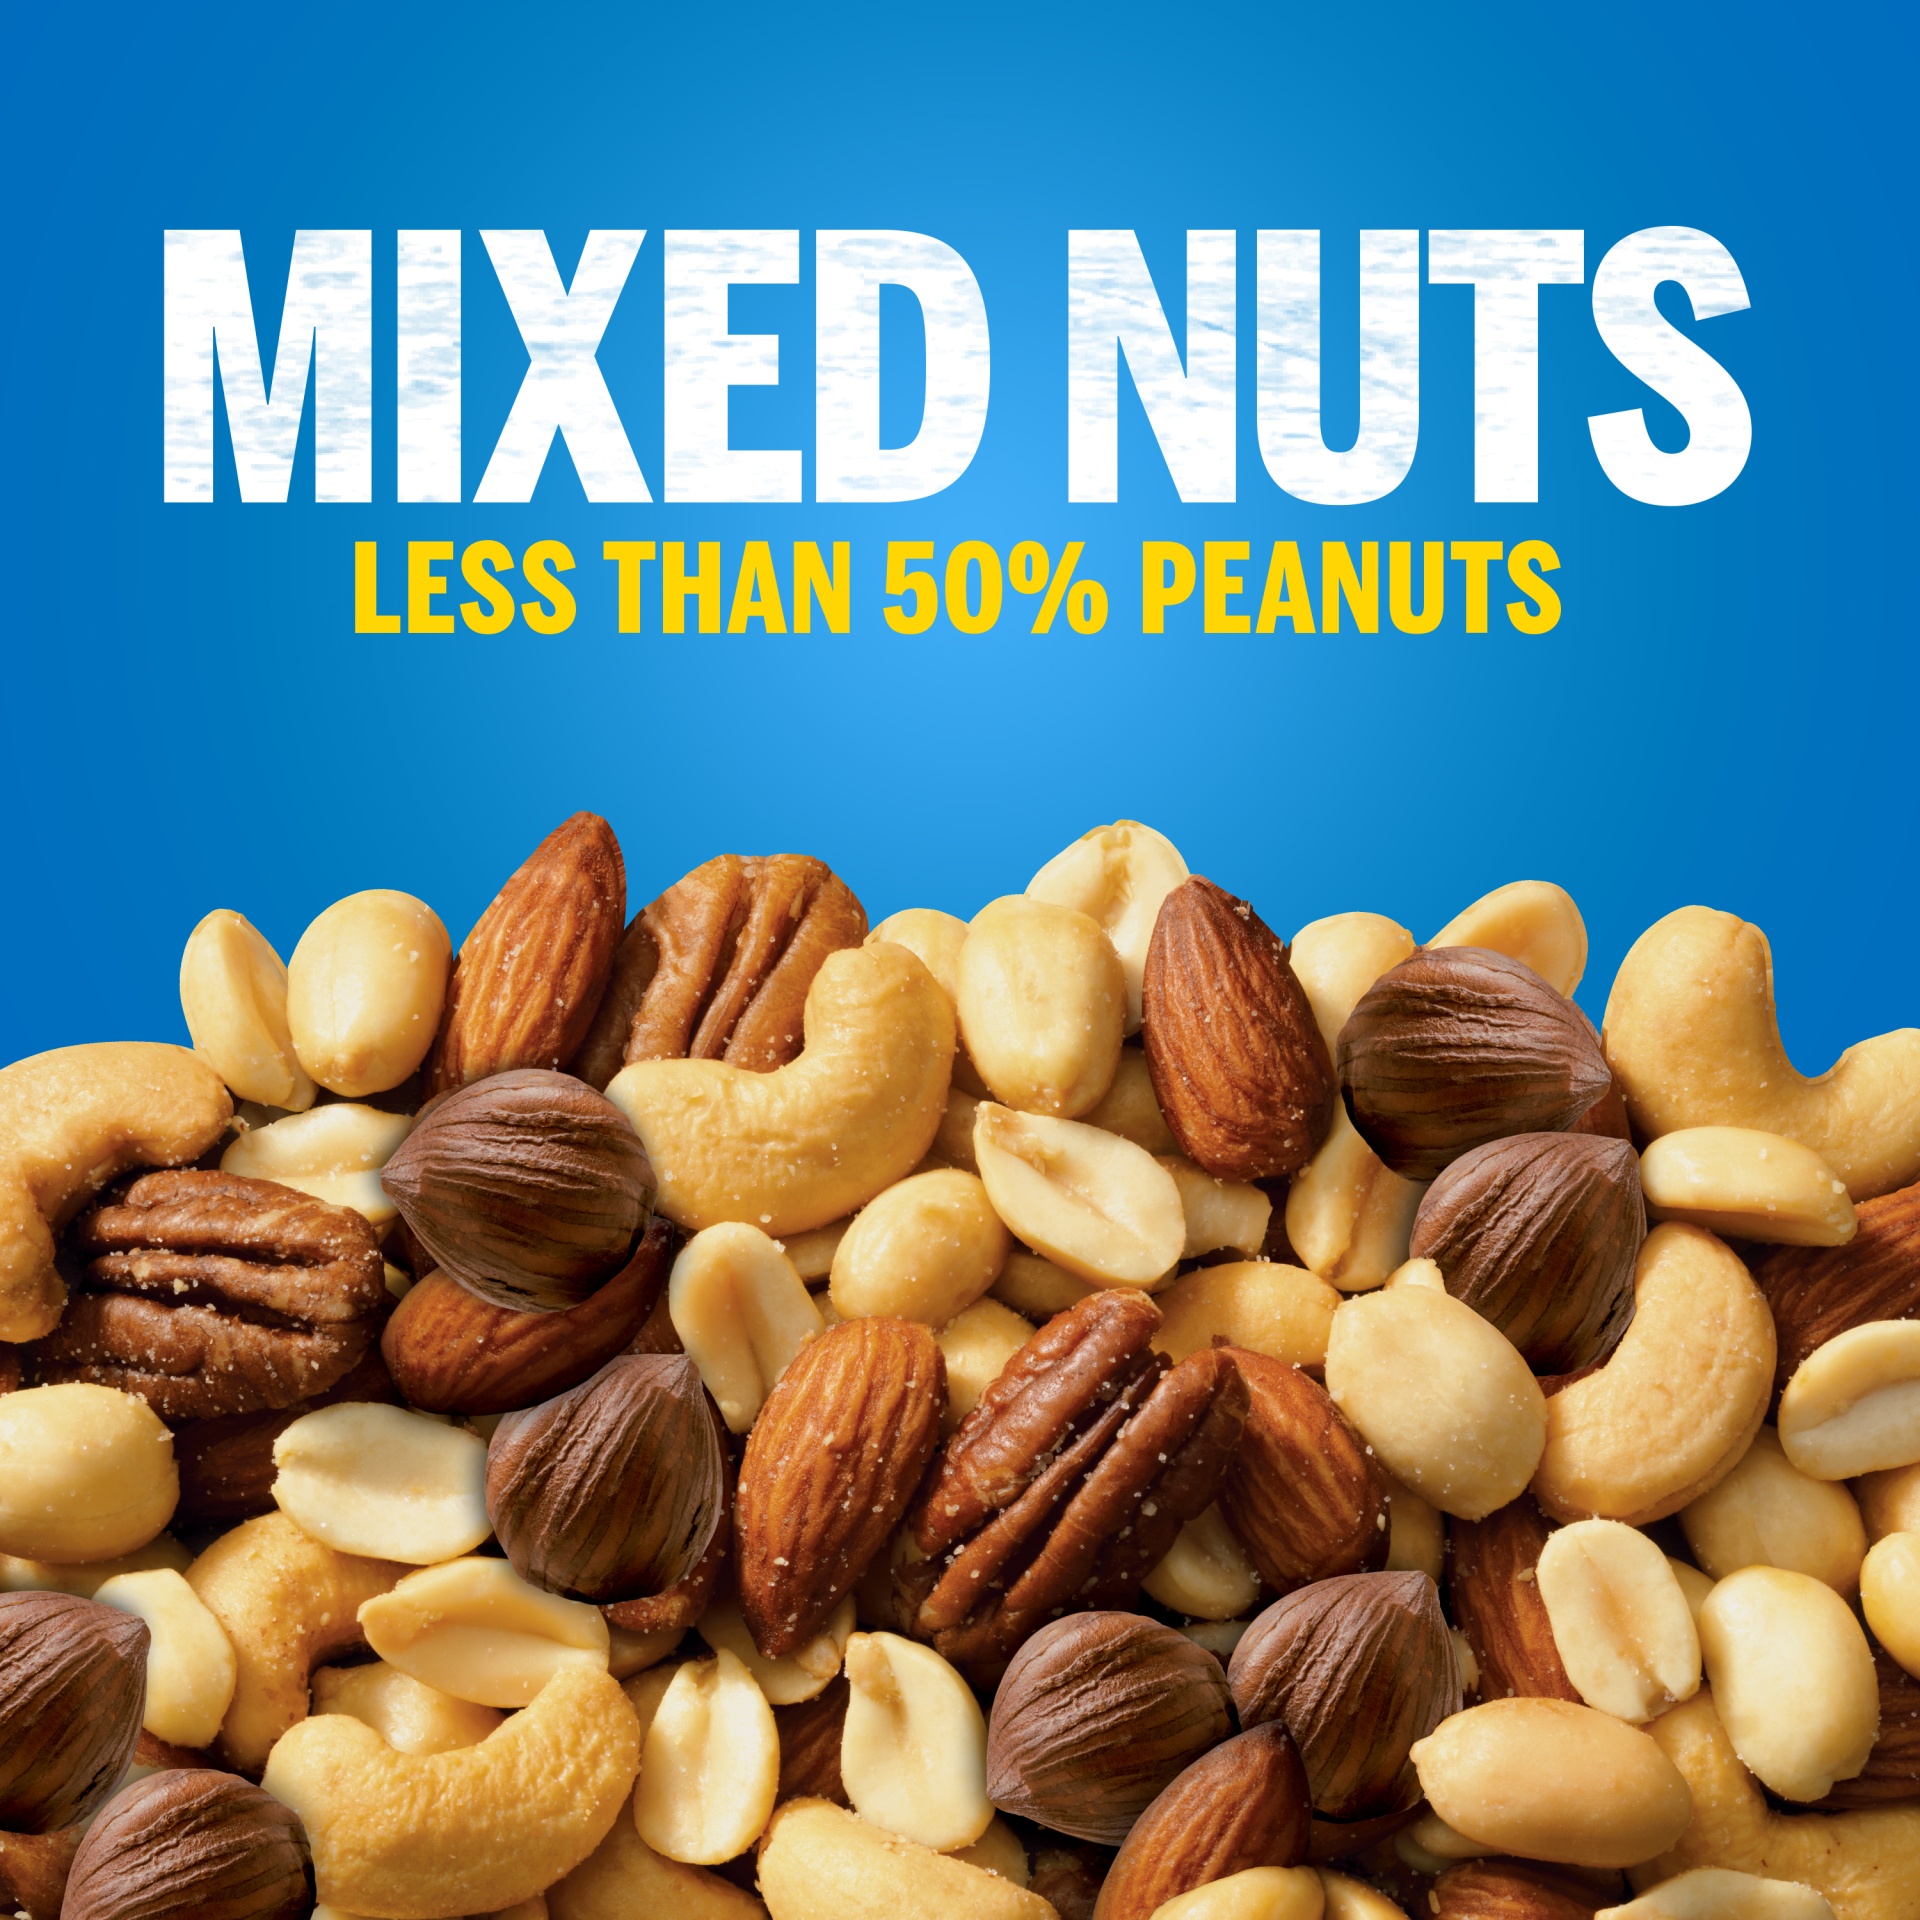 slide 7 of 15, Planters Mixed Nuts Less Than 50% Peanuts with Peanuts, Almonds, Cashews, Hazelnuts & Pecans, 10.3 oz